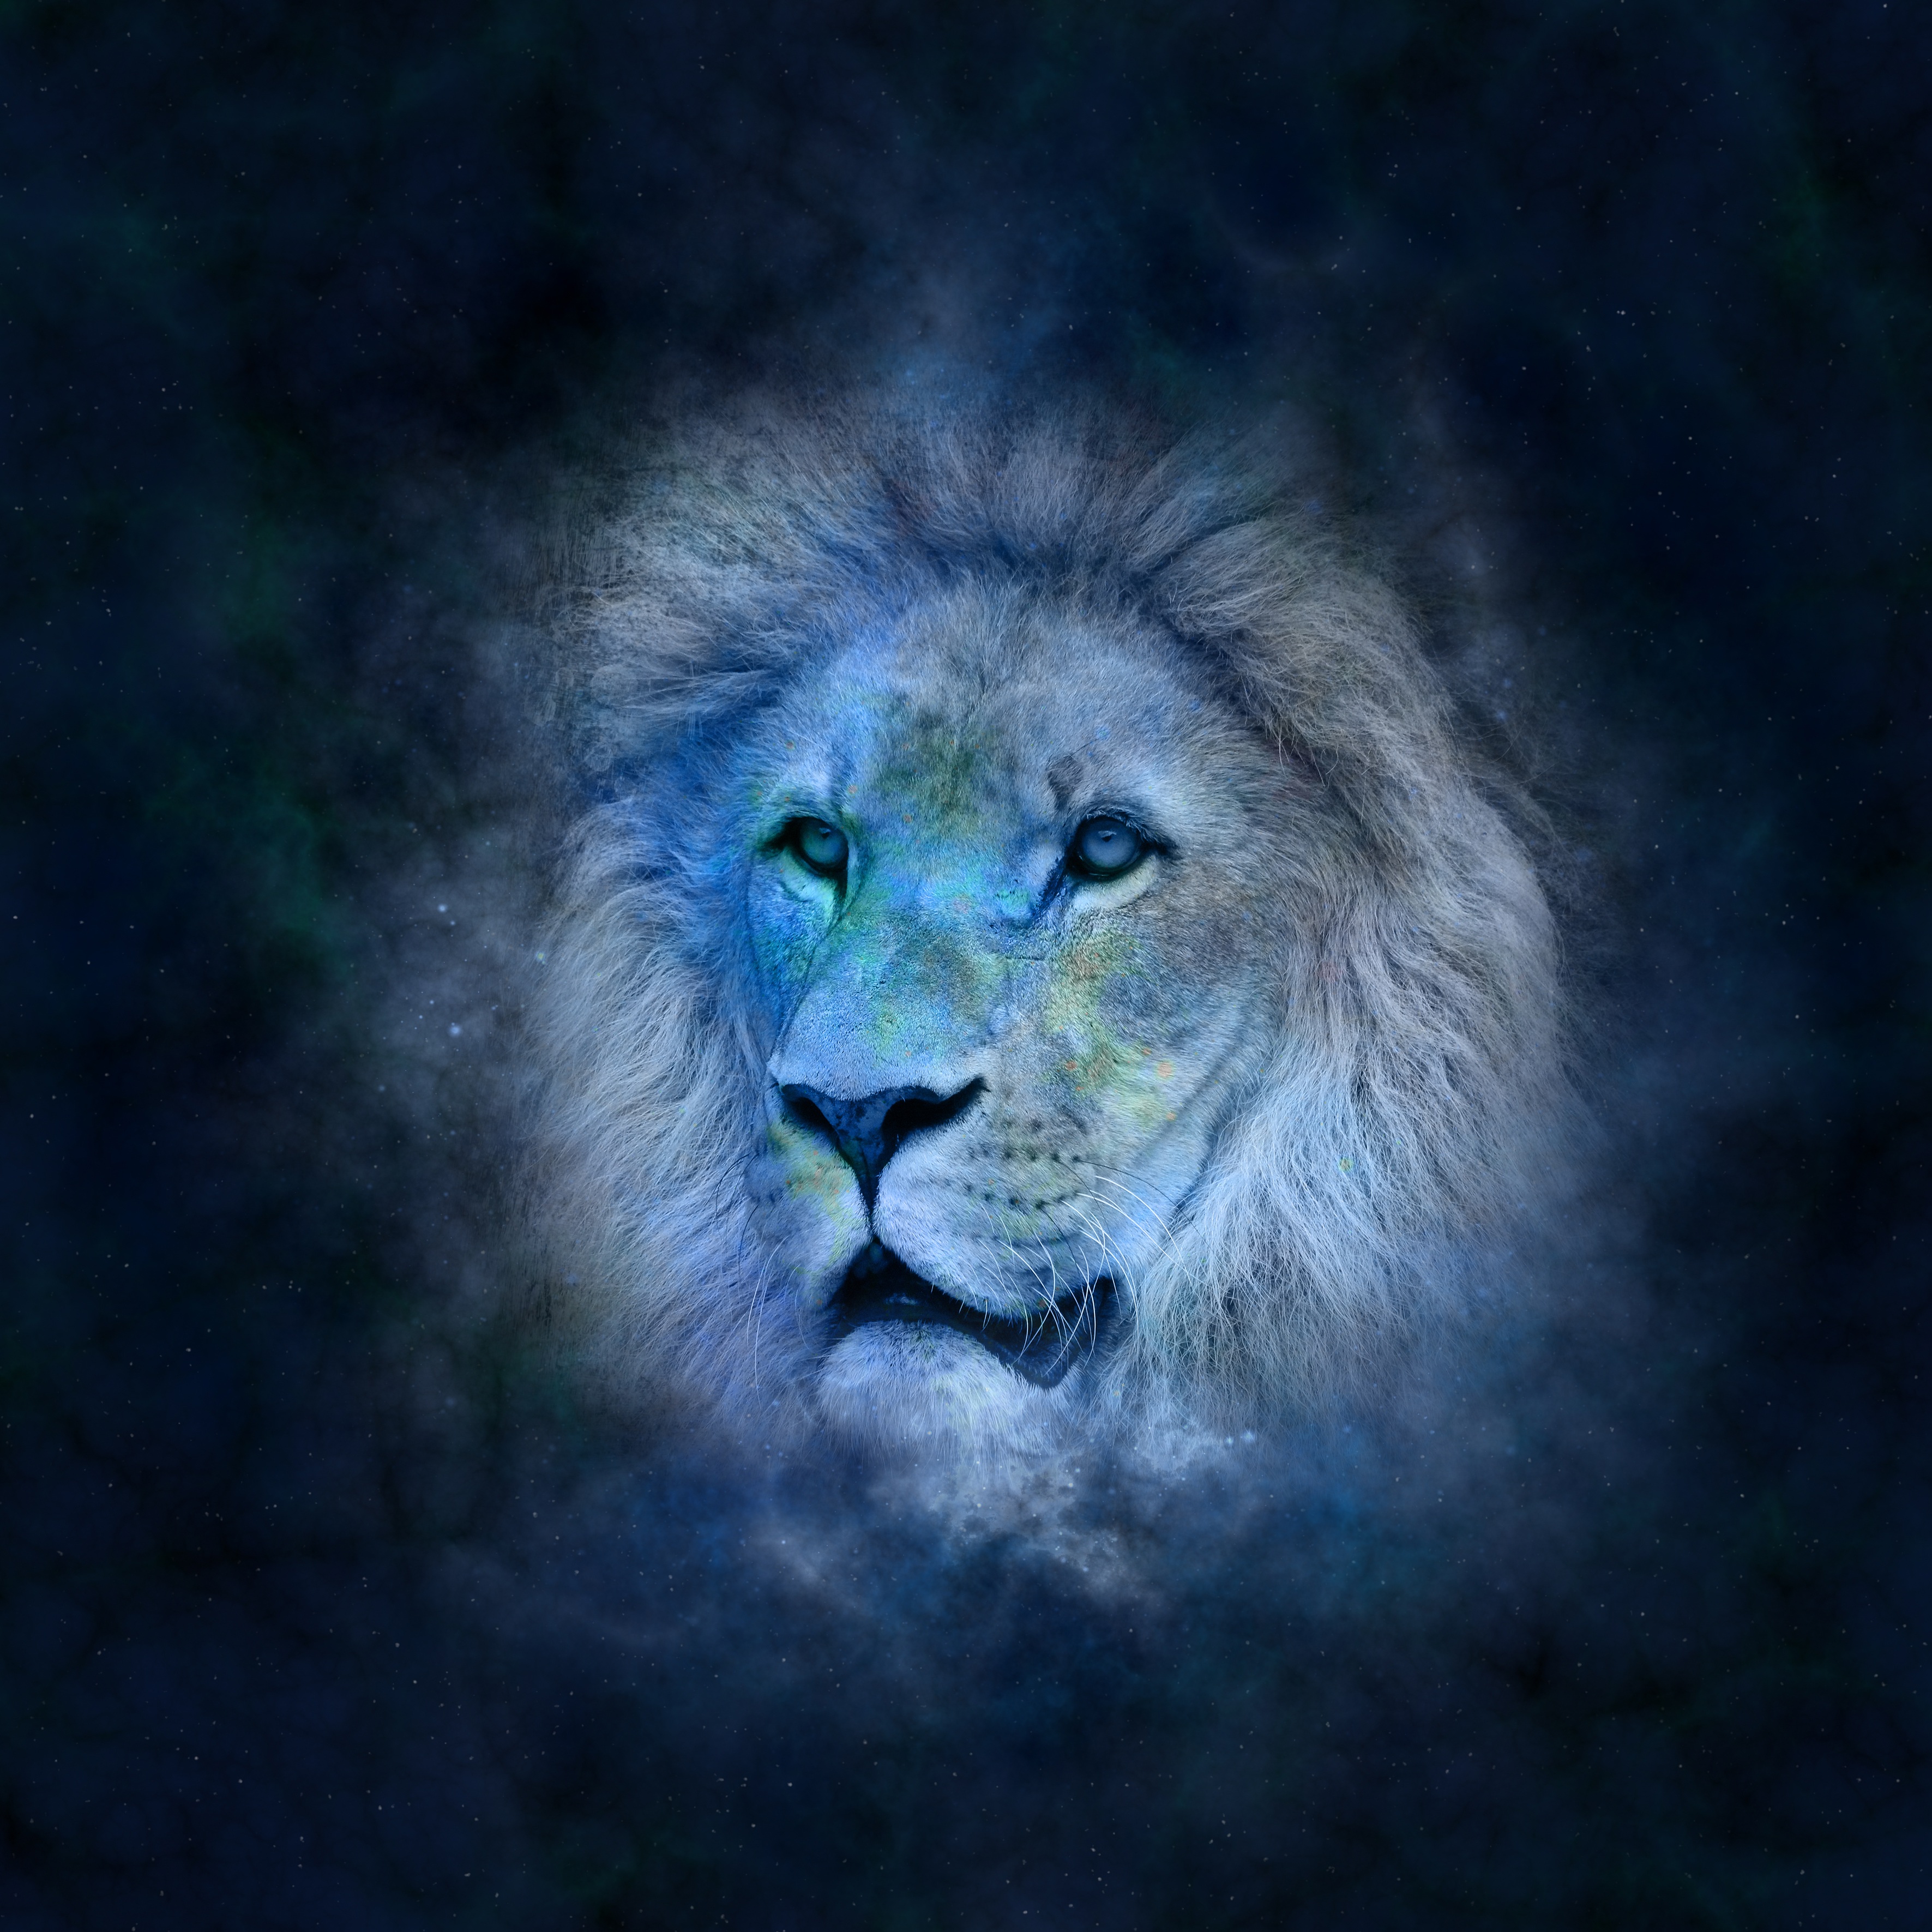 132977 Screensavers and Wallpapers Cosmic for phone. Download art, muzzle, lion, space, mane, cosmic pictures for free